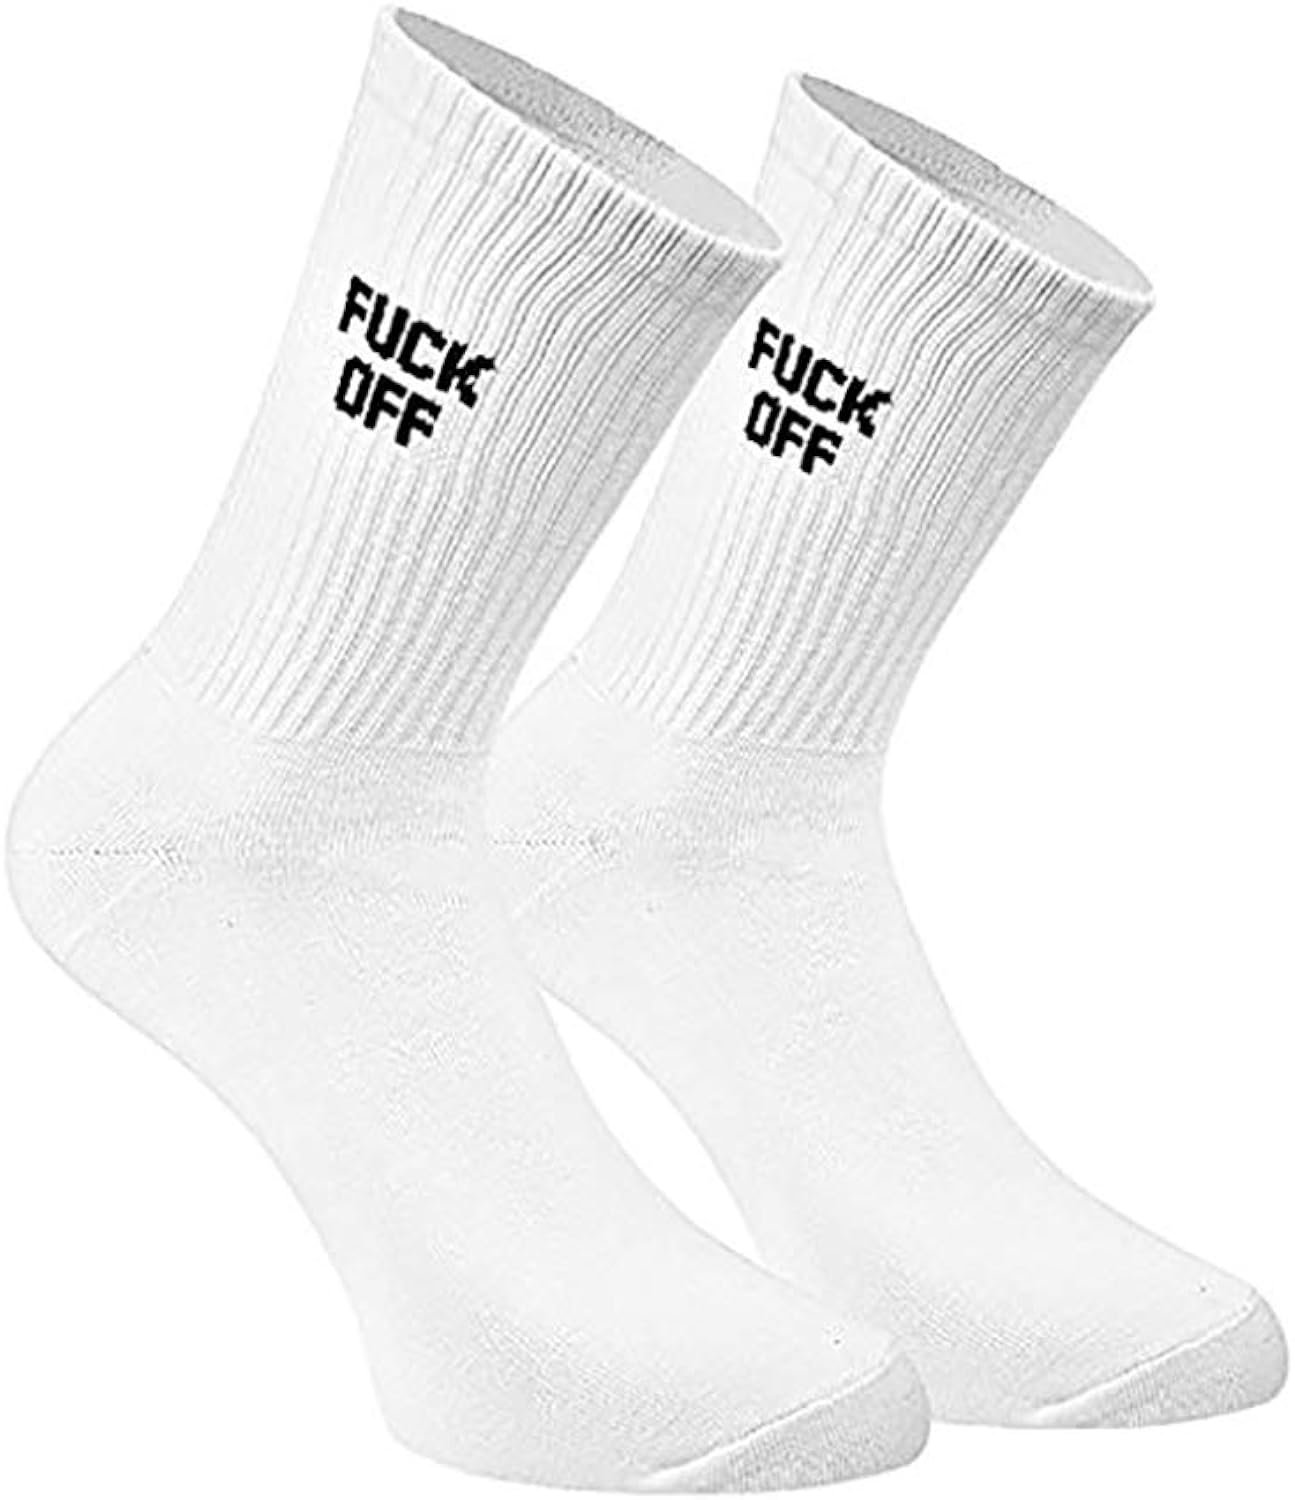 FUCK OFF Swear Word Curse Printed Stockings Crew Socks Review